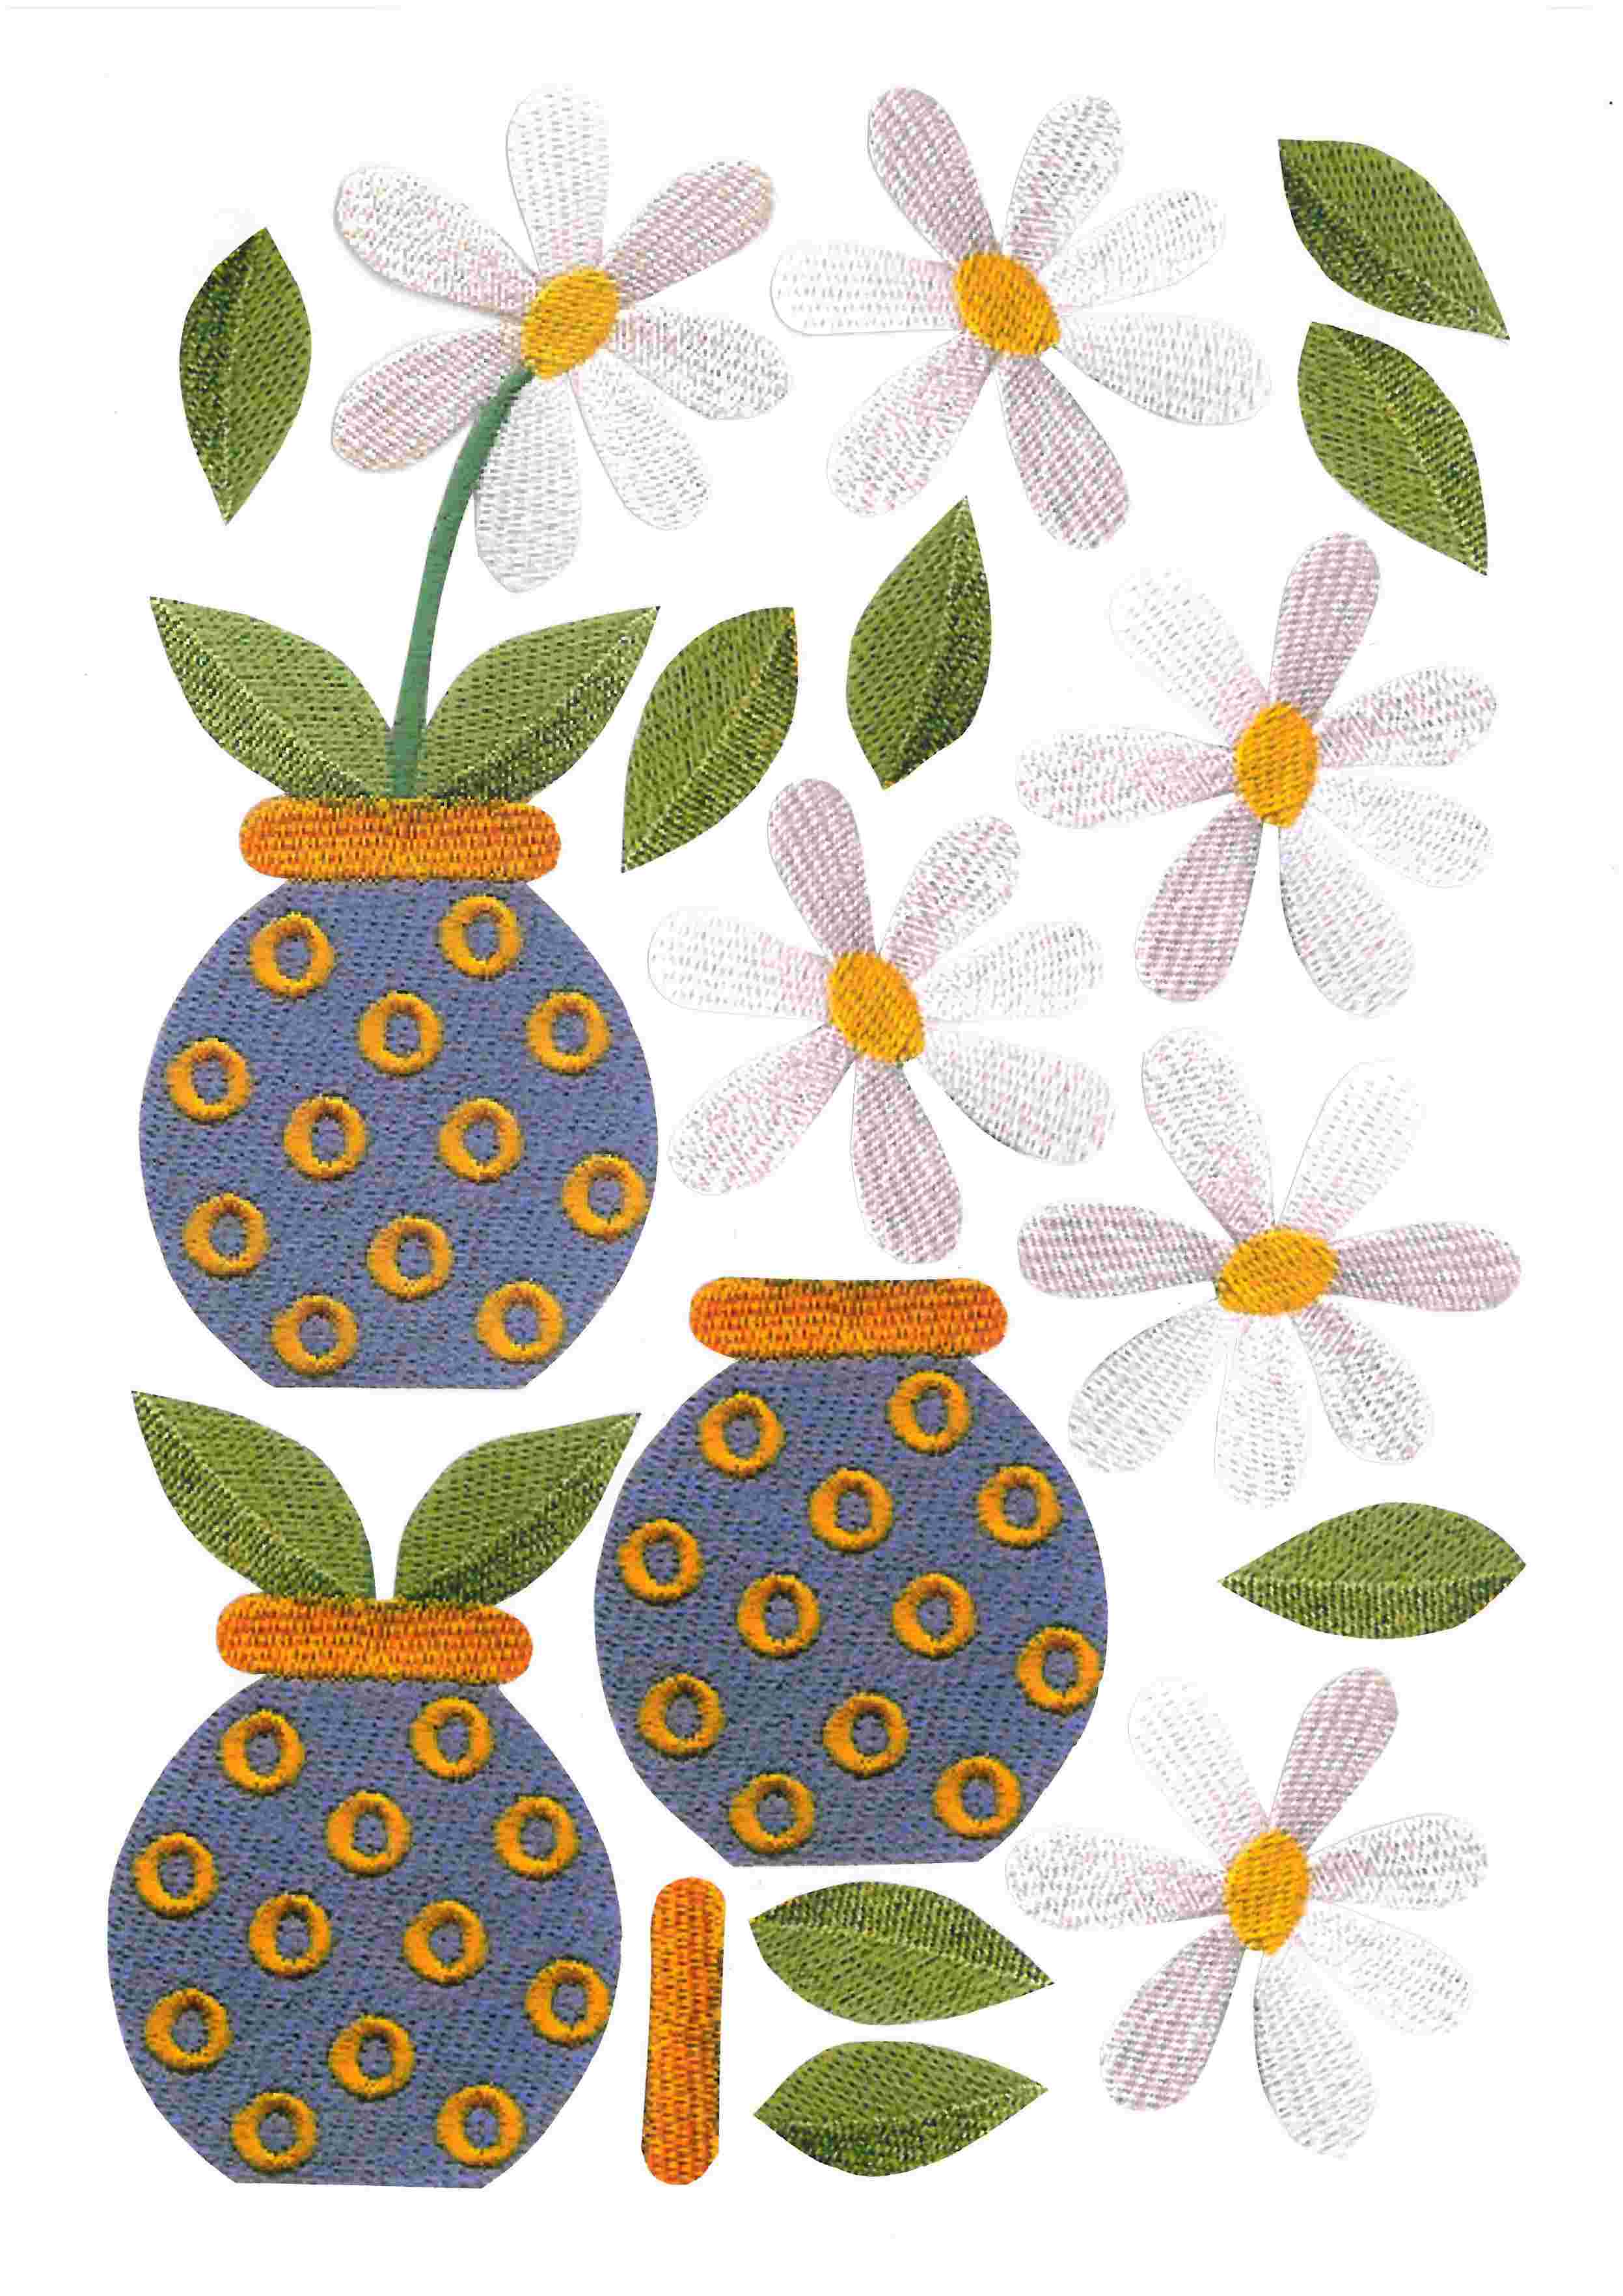 Stitched Effect Daisy Pot Set 02 - 93 Pages to DOWNLOAD